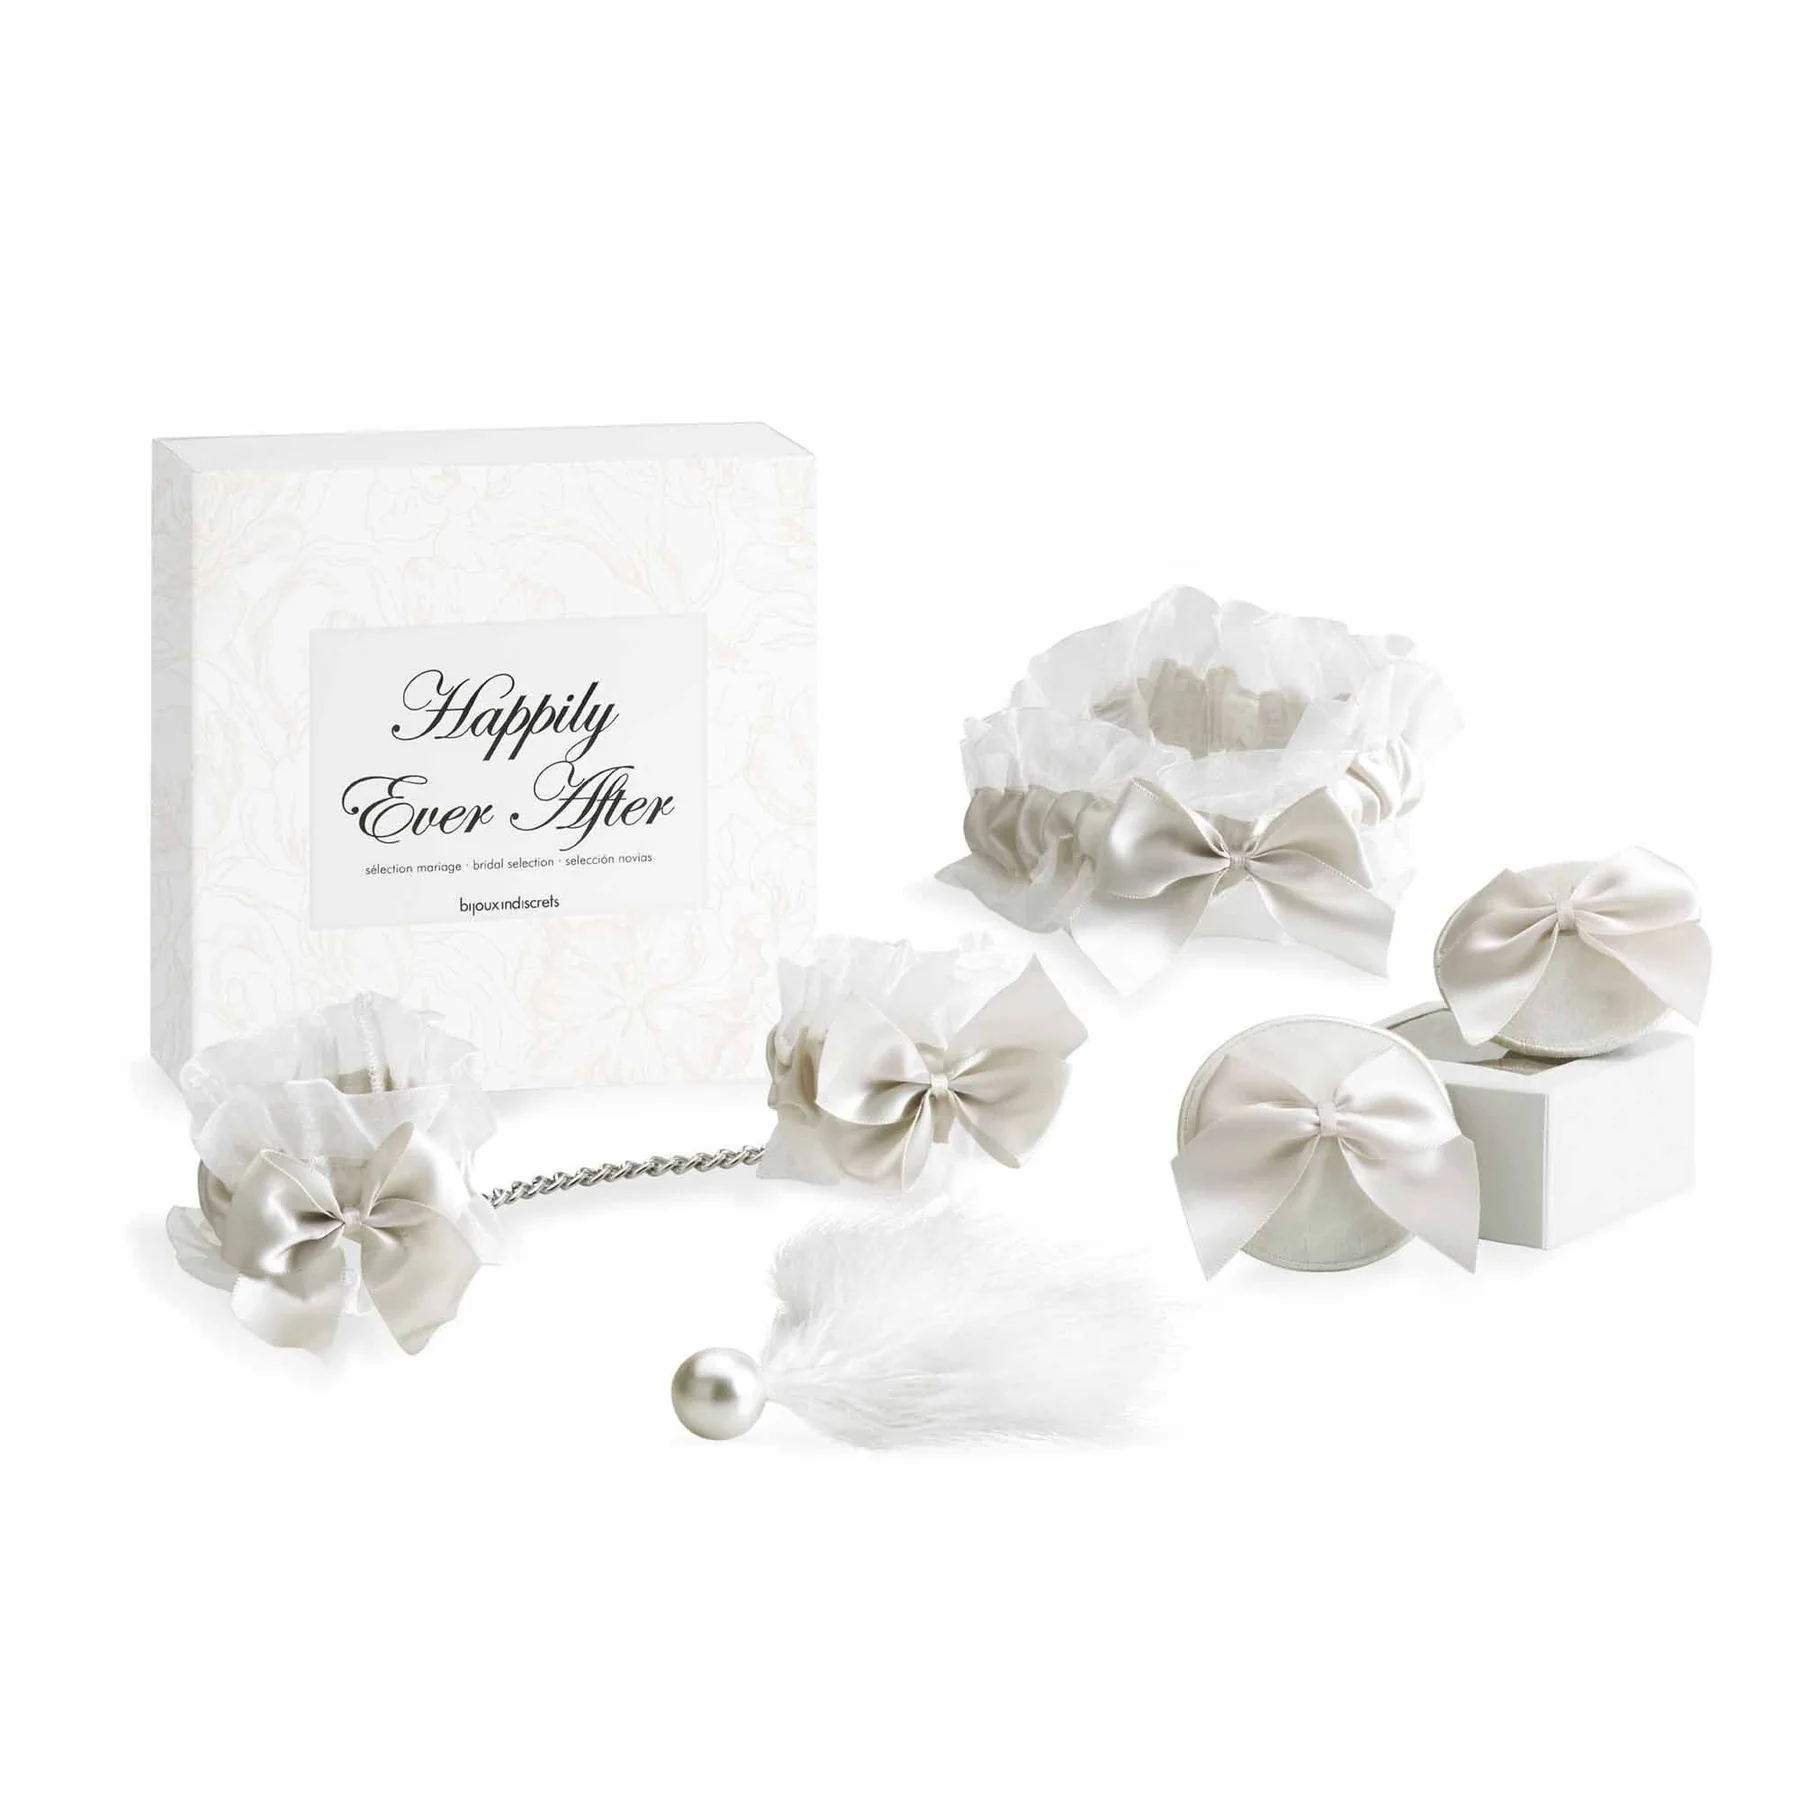 Happily Ever After Couples Gift Box